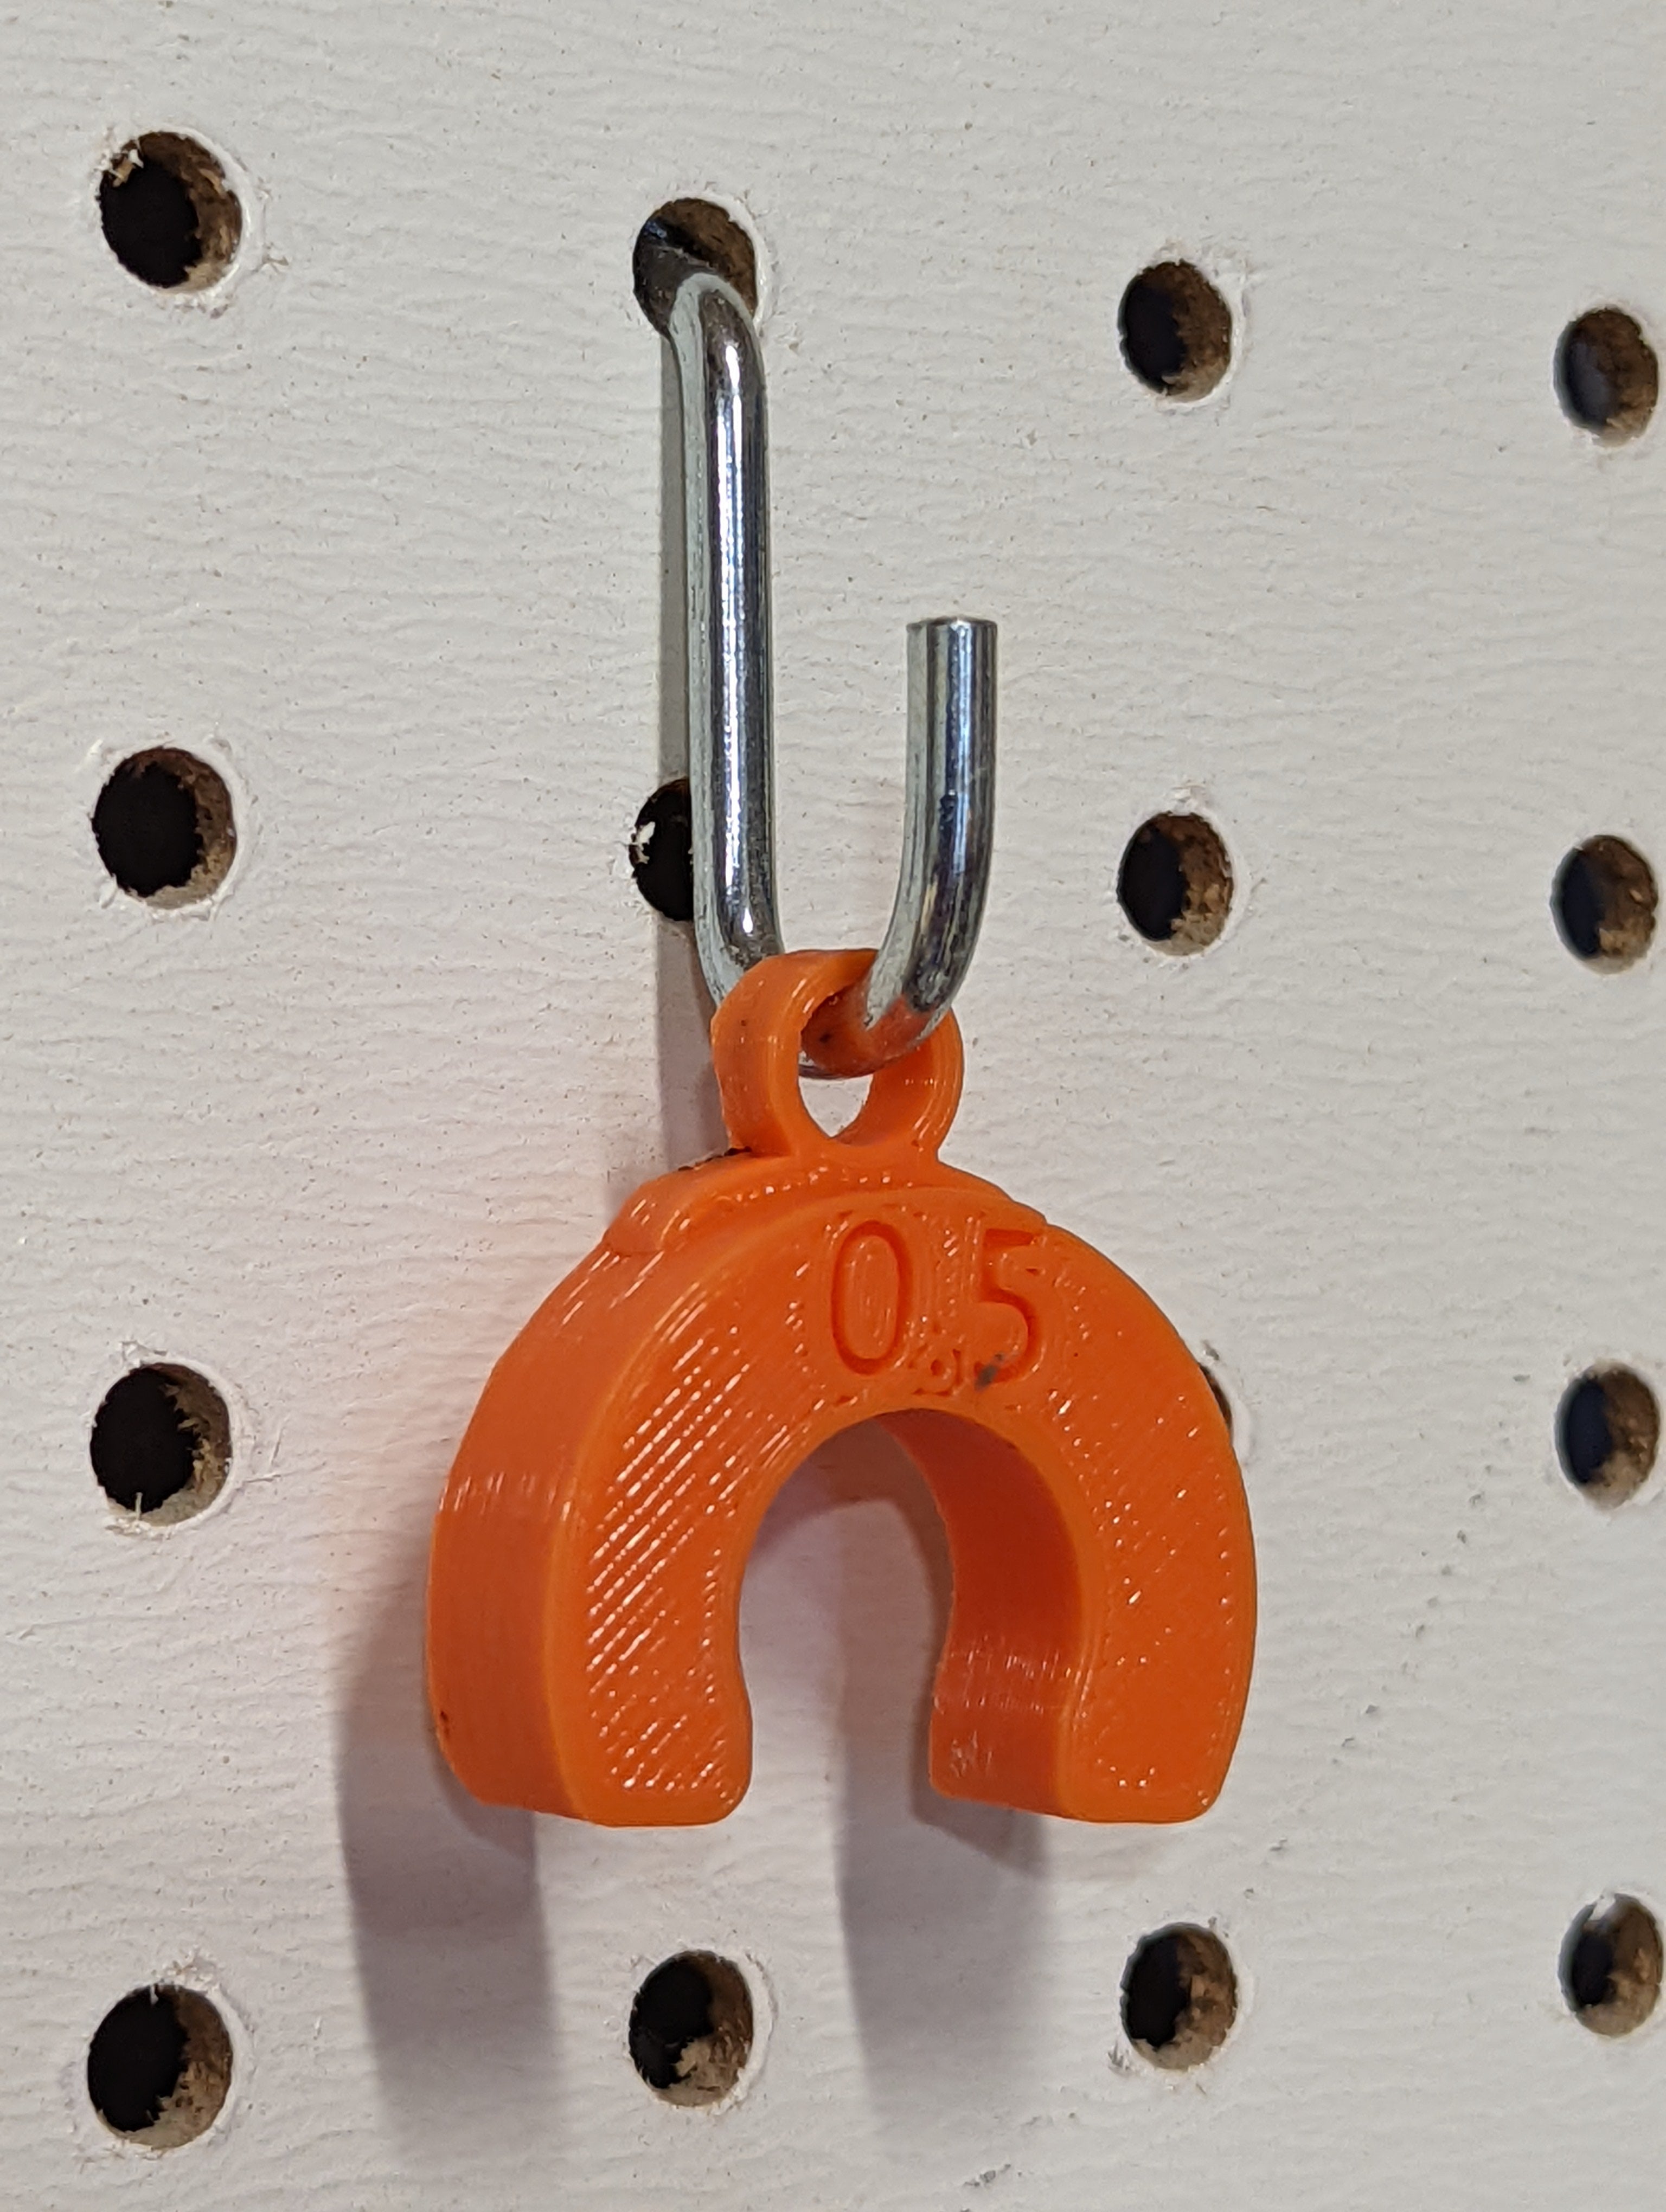 Pegboard Hanging Tool for Sharkbite Fitting Disconnection